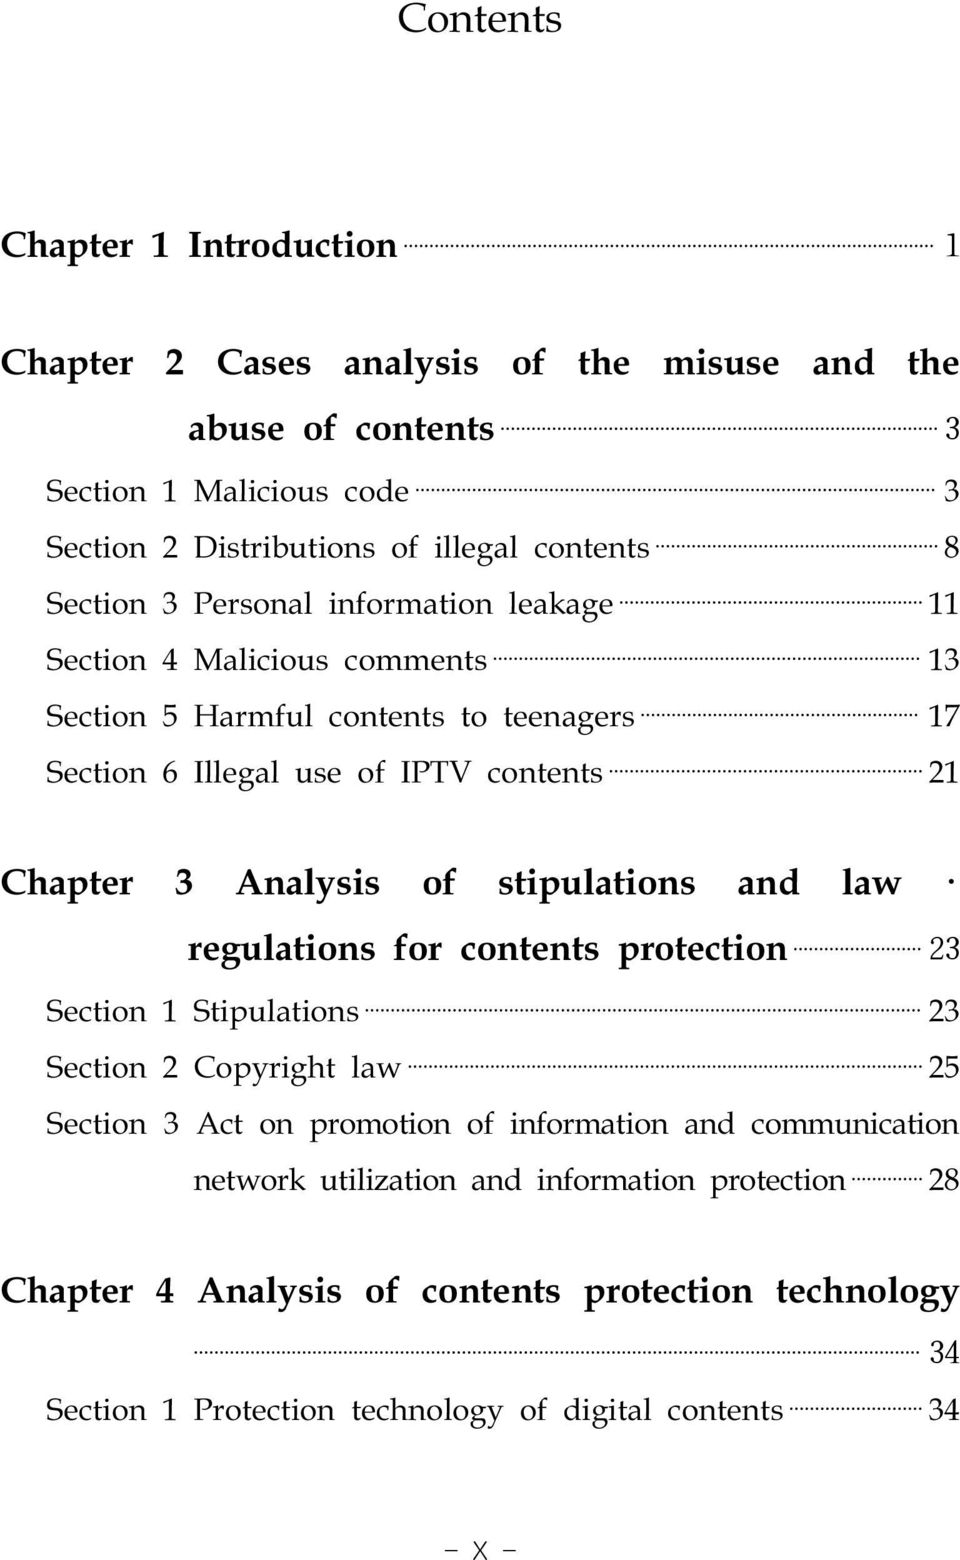 Analysis of stipulations and law regulations for contents protection 23 Section 1 Stipulations 23 Section 2 Copyright law 25 Section 3 Act on promotion of information and